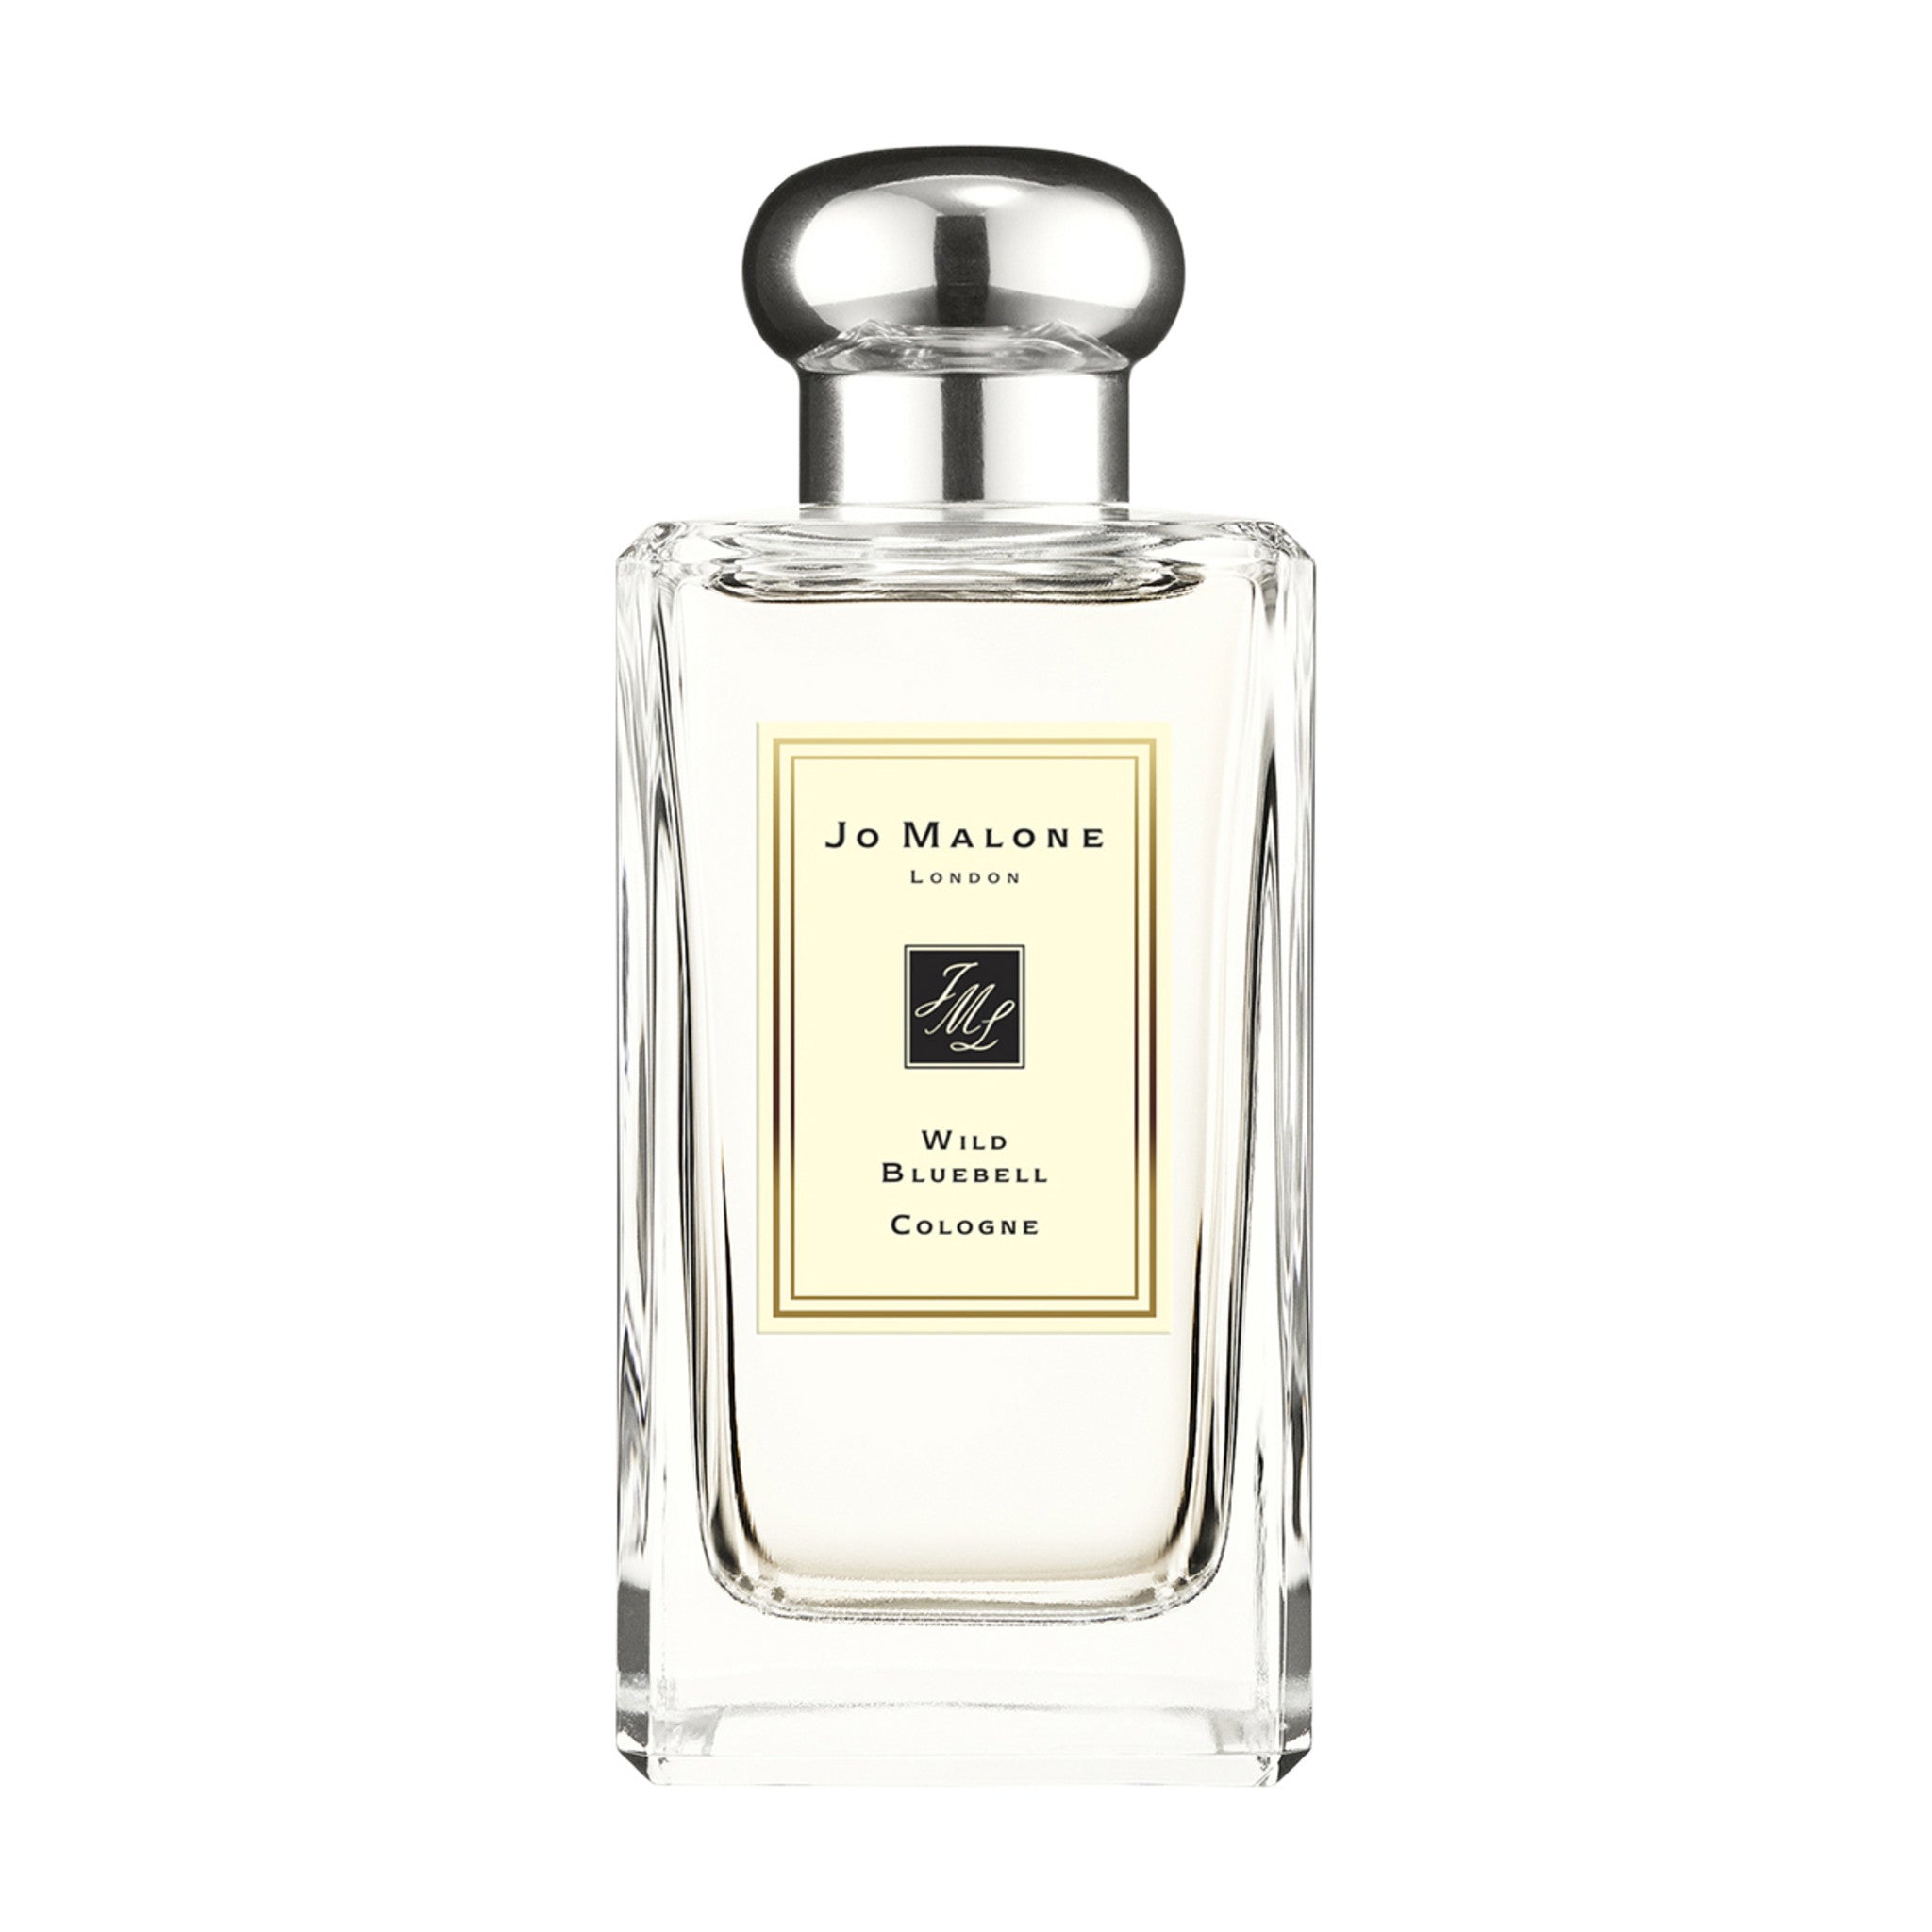 Jo Malone London Wild Bluebell Cologne Size variant: 100 ml main image.